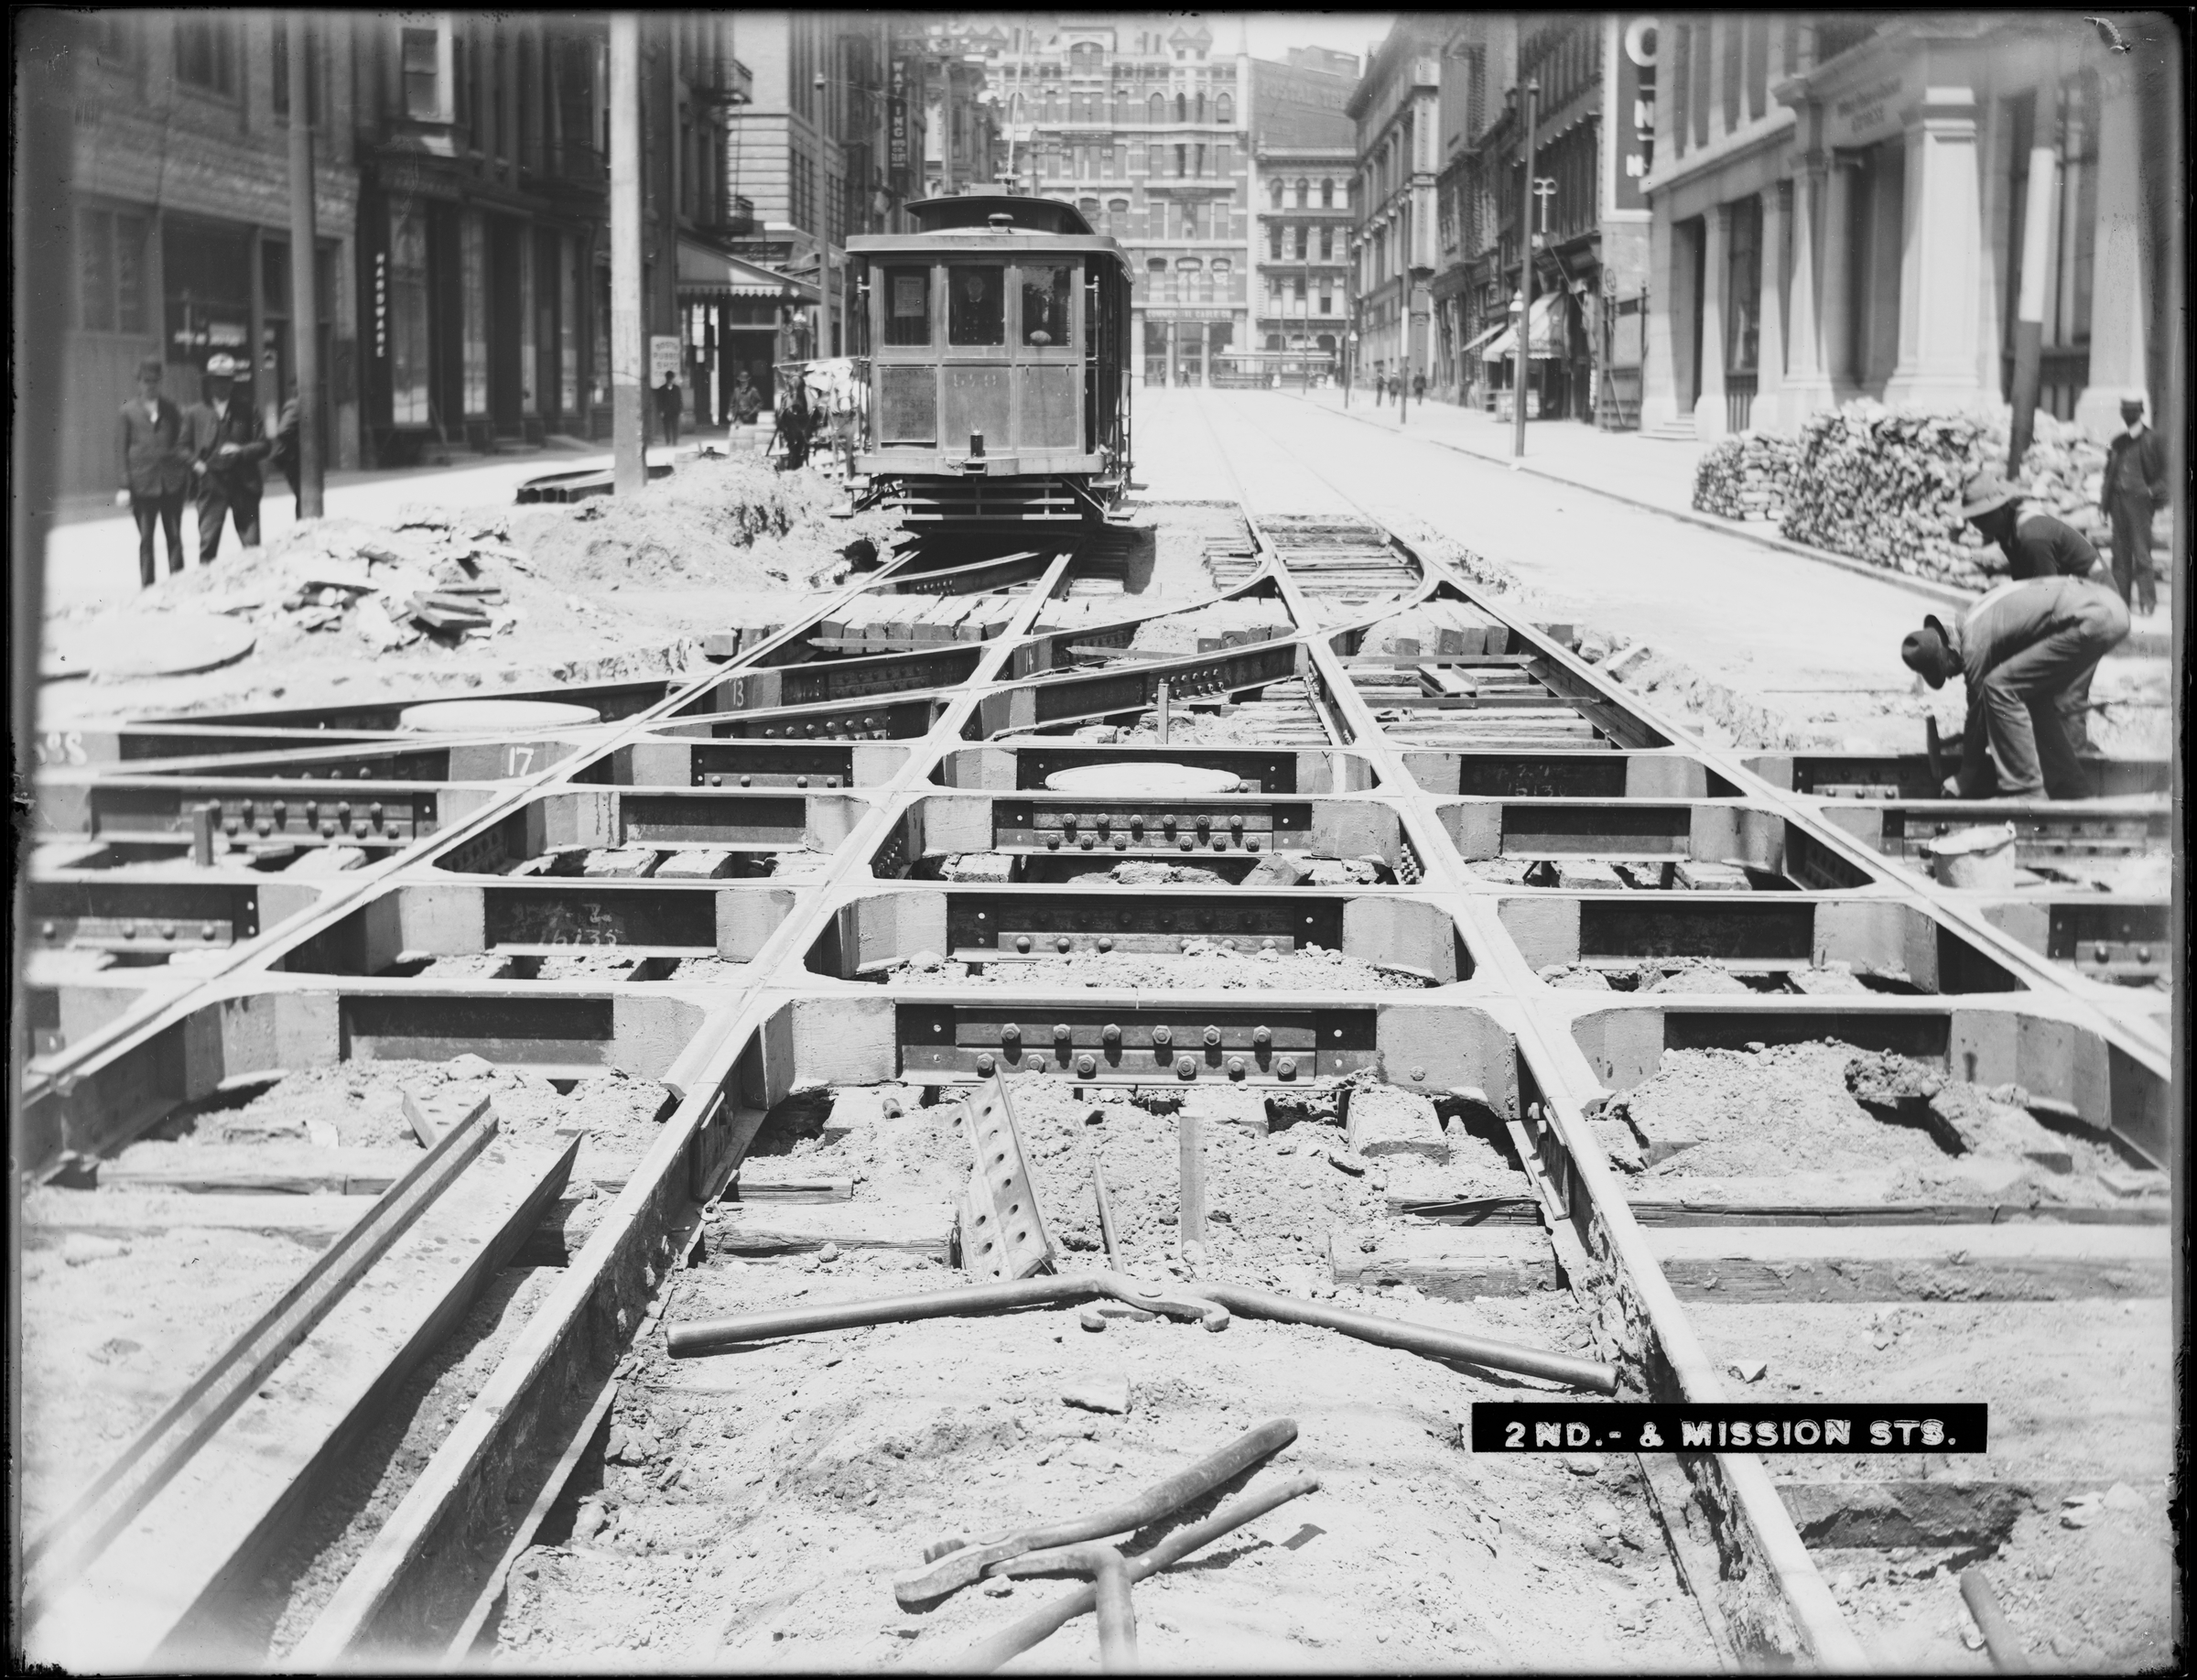 Historic black and white photograph of streetcar 578 on 2nd Street at Mission Street. The foreground is dominated by the grid of tracks still being laid. Two crewmen are working on the tracks on the right side. Two pedesri